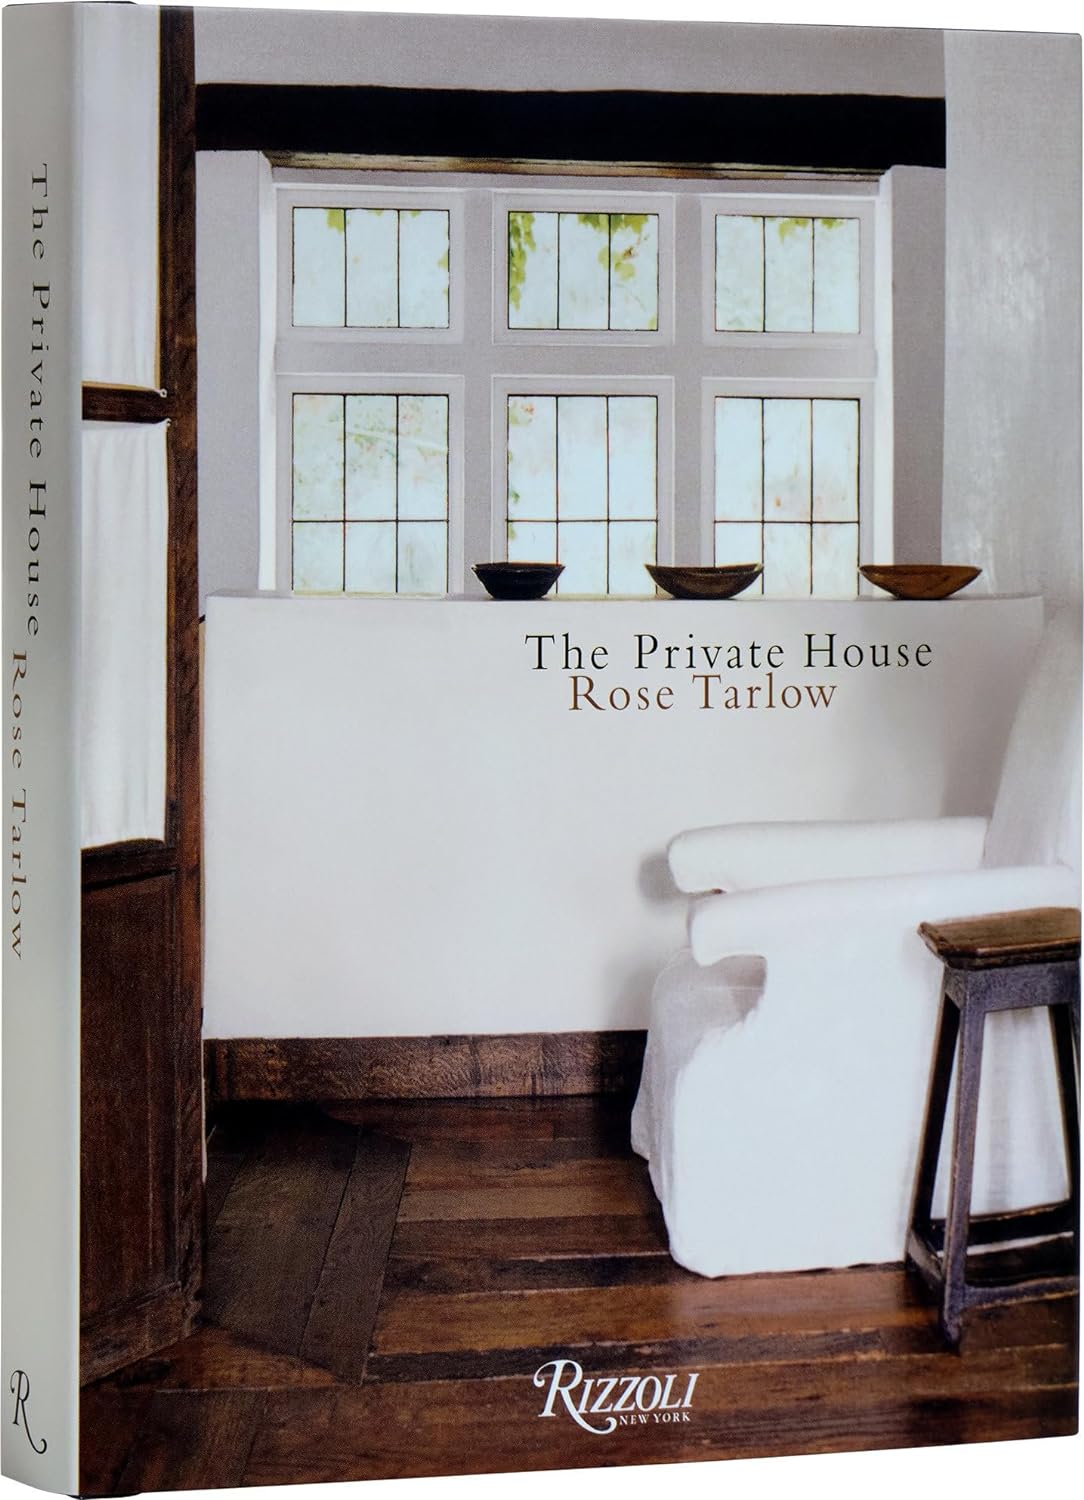 THE PRIVATE HOUSE Rose Tarlow (Rizzoli, 2024) book cover. #rosetarlow #theprivatehouse